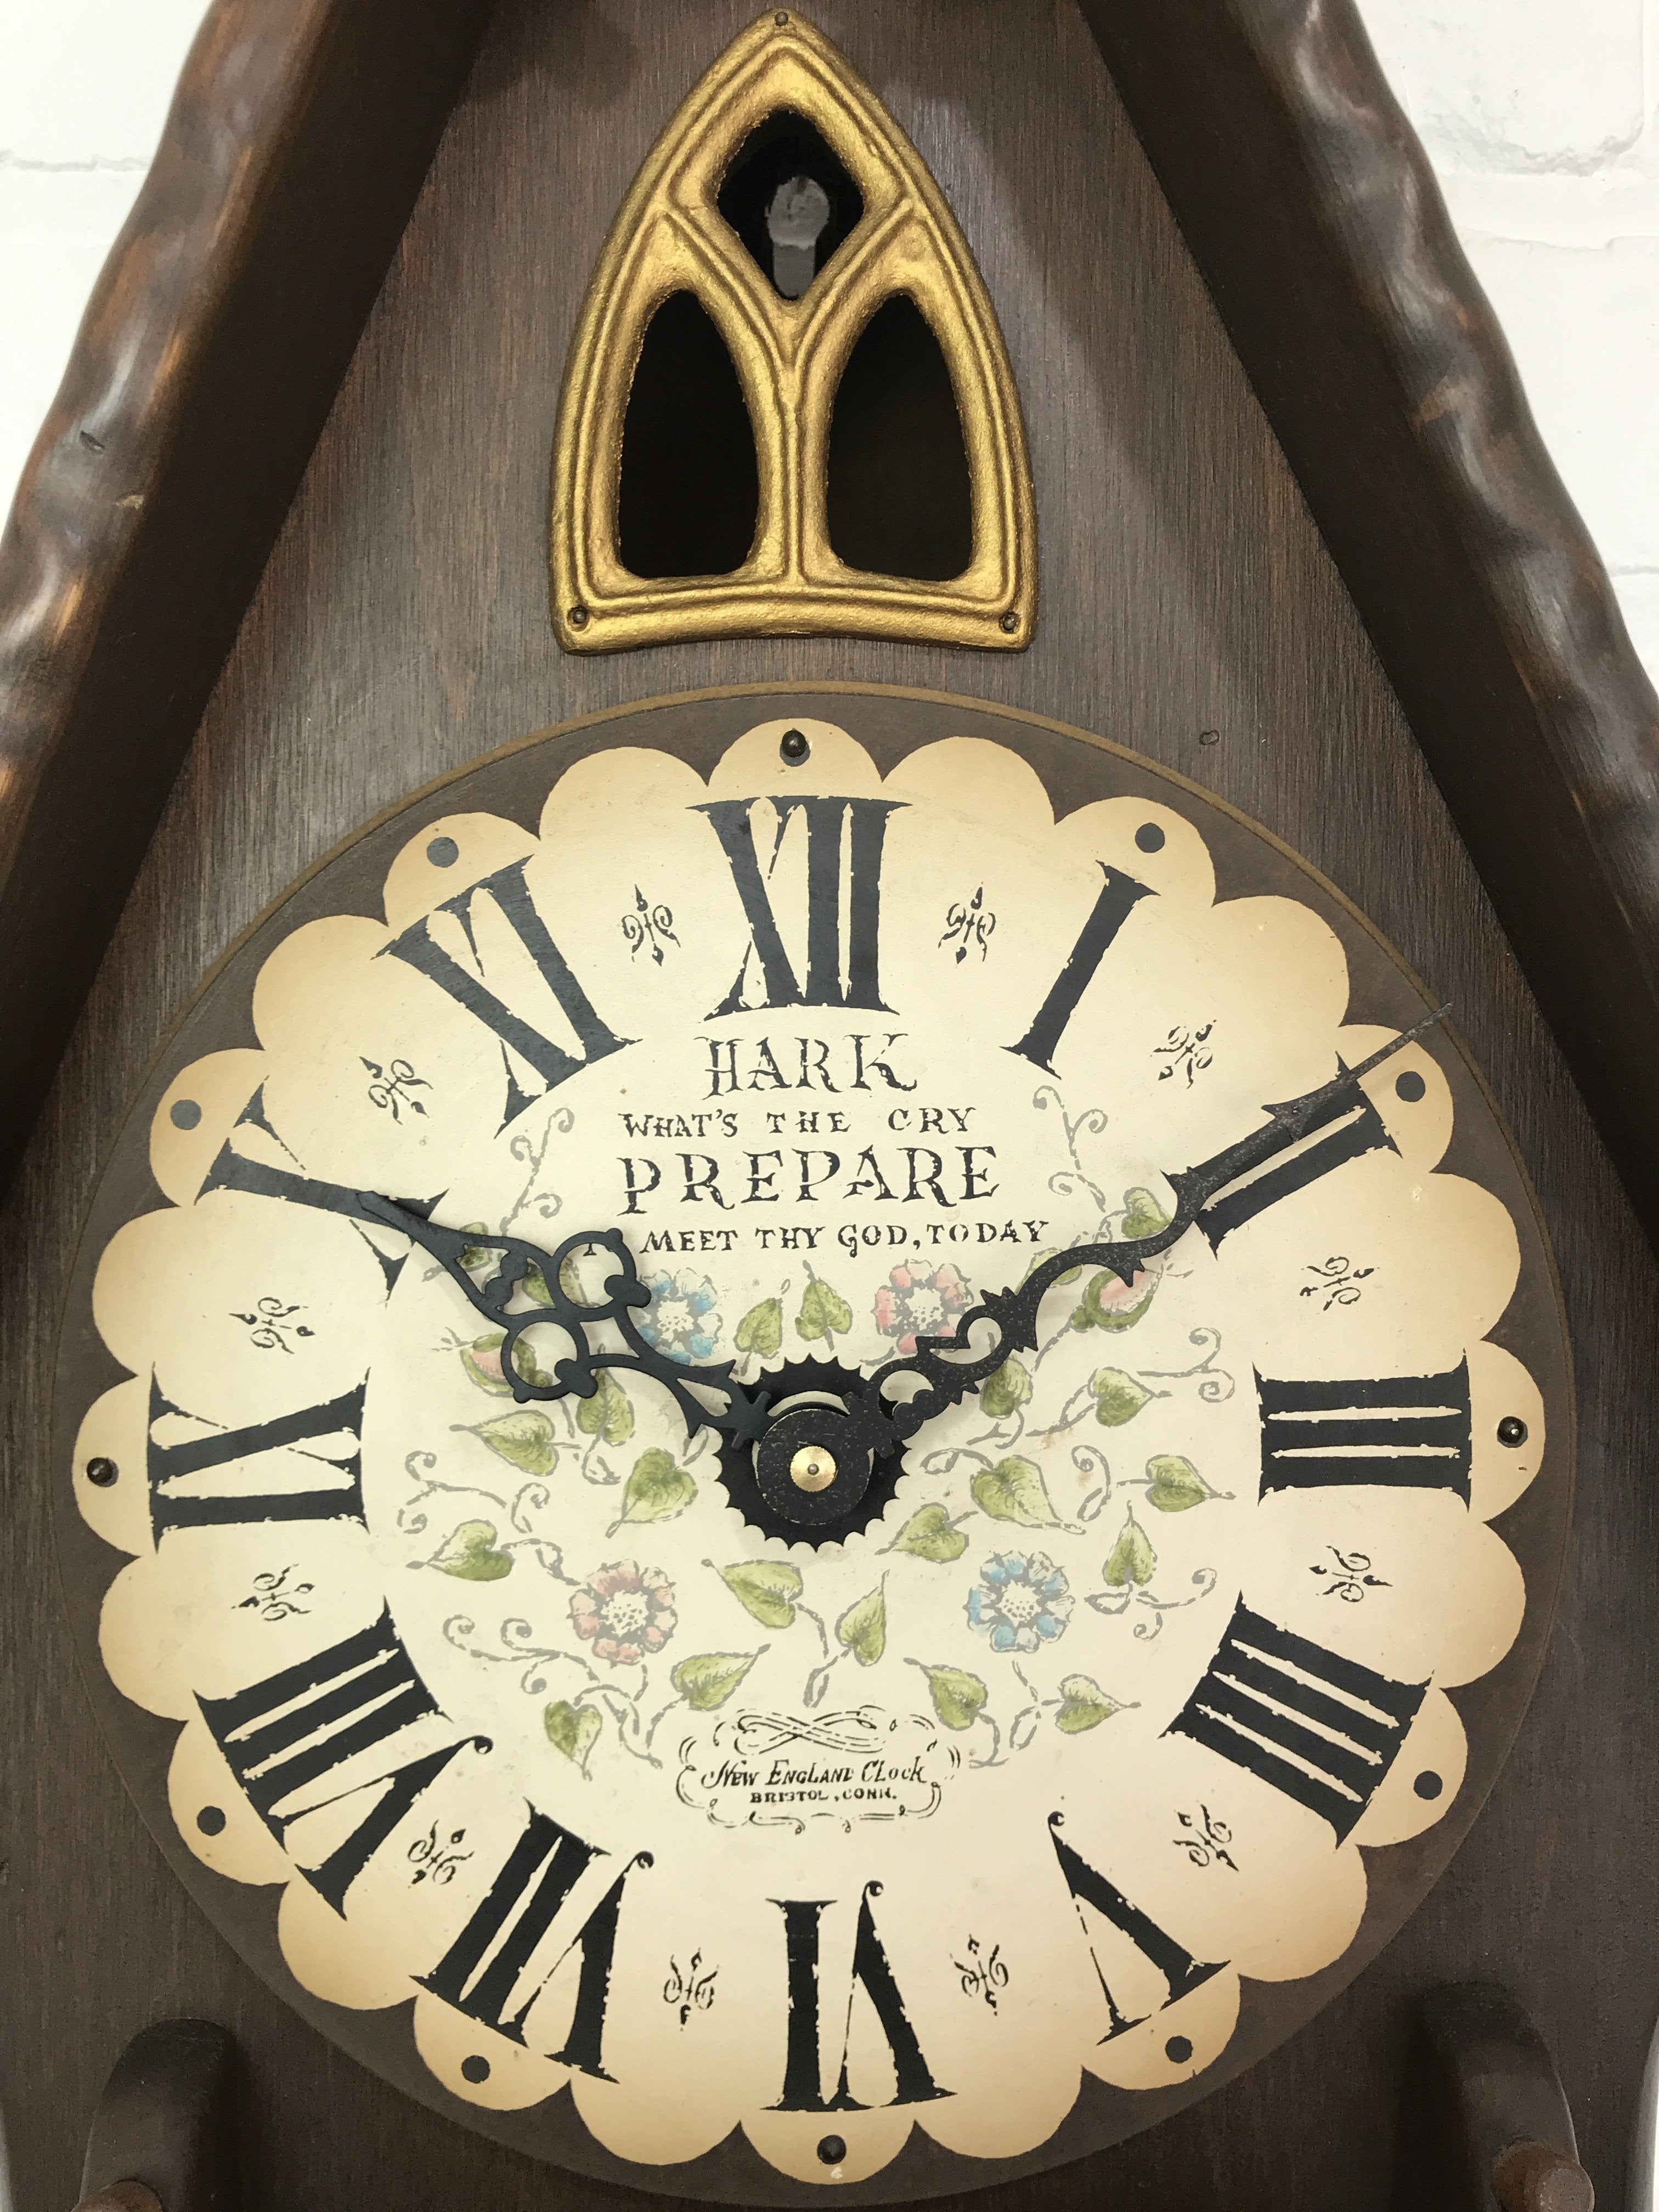 Vintage Cathedral New England Wall Clock | eXibit collection